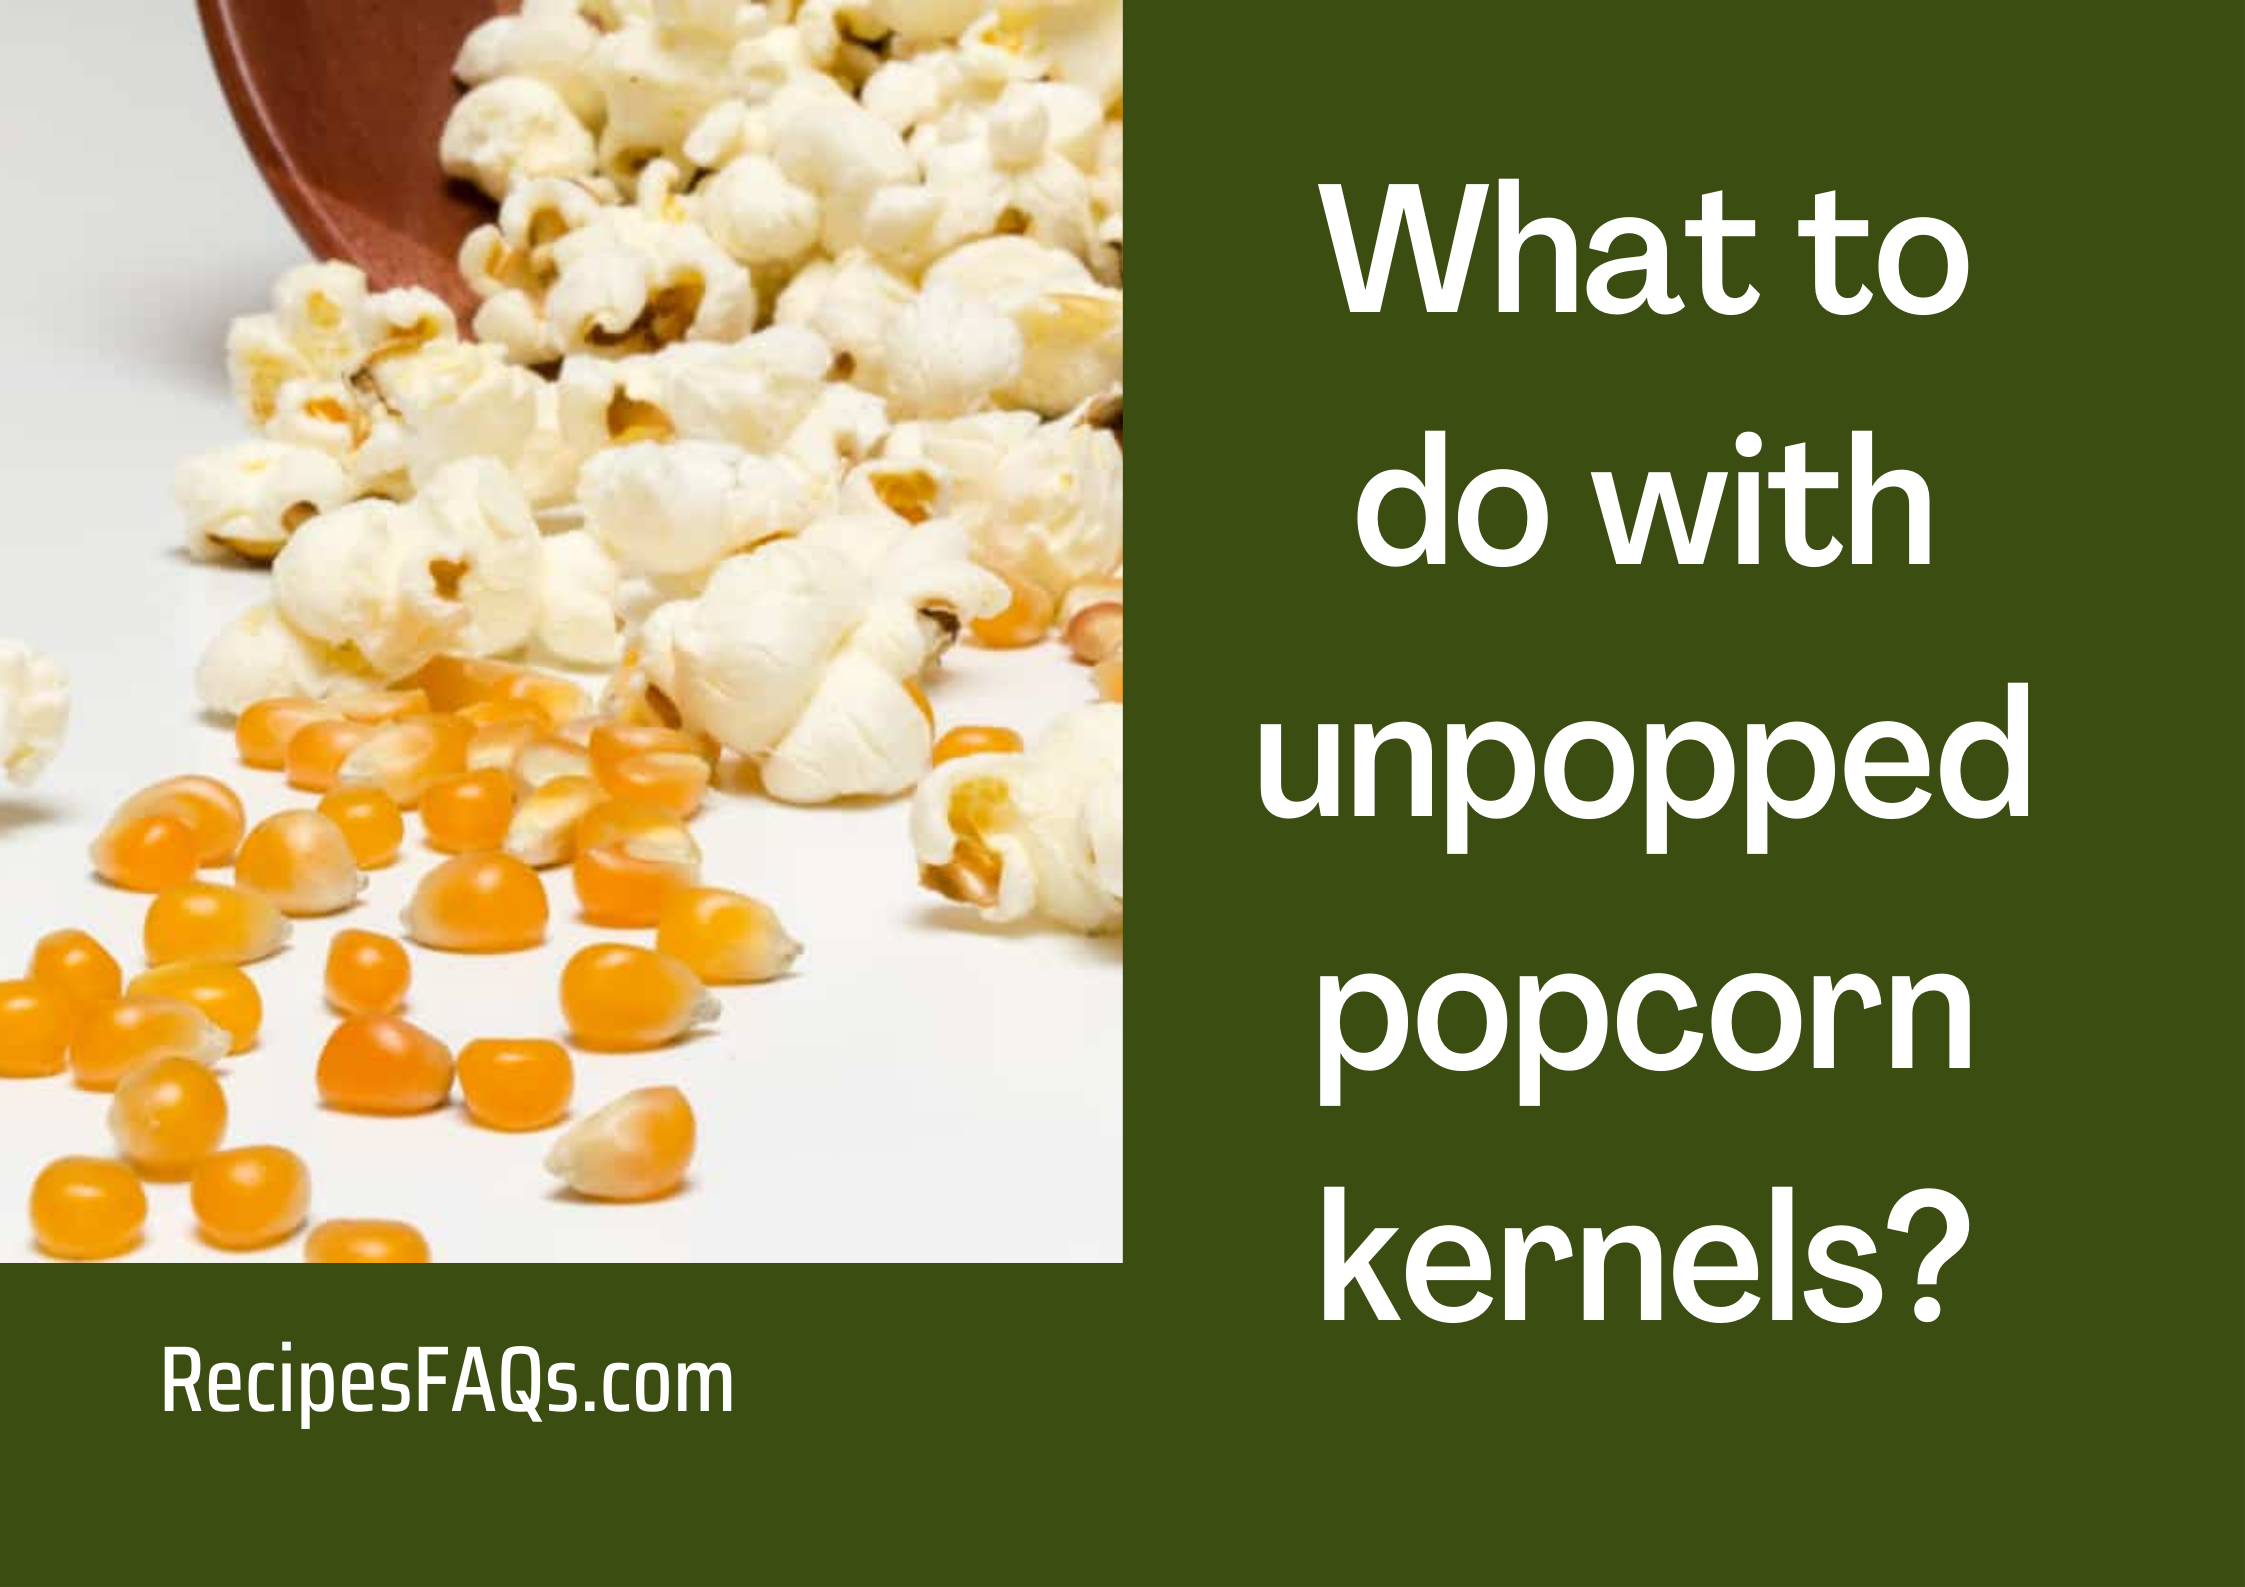 What to do with unpopped popcorn kernels